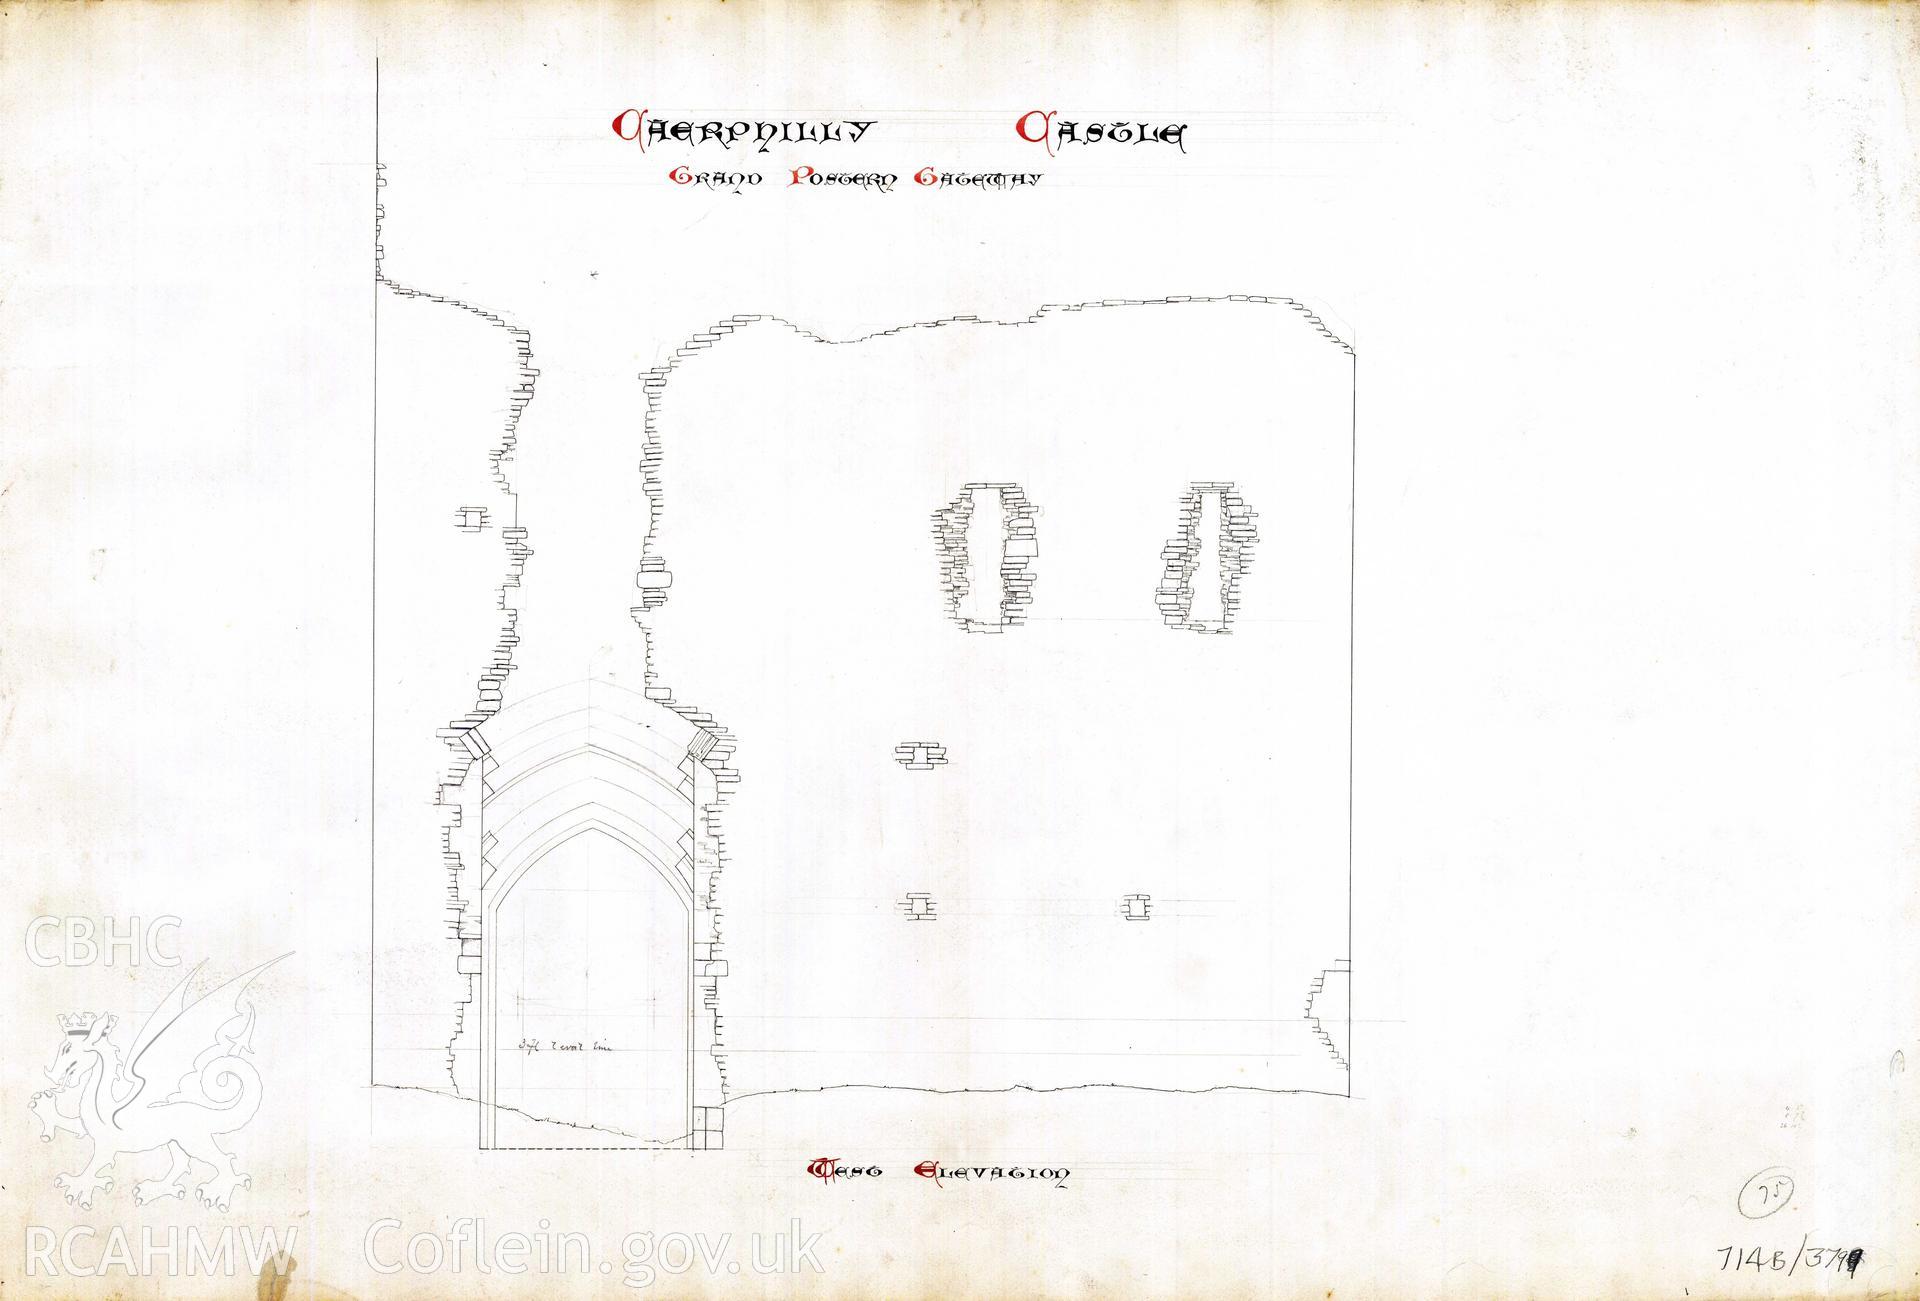 Cadw guardianship monument drawing of Caerphilly Castle. Outer E gate, W (rear) elev. Cadw Ref. No:714B/379. Scale 1:24.